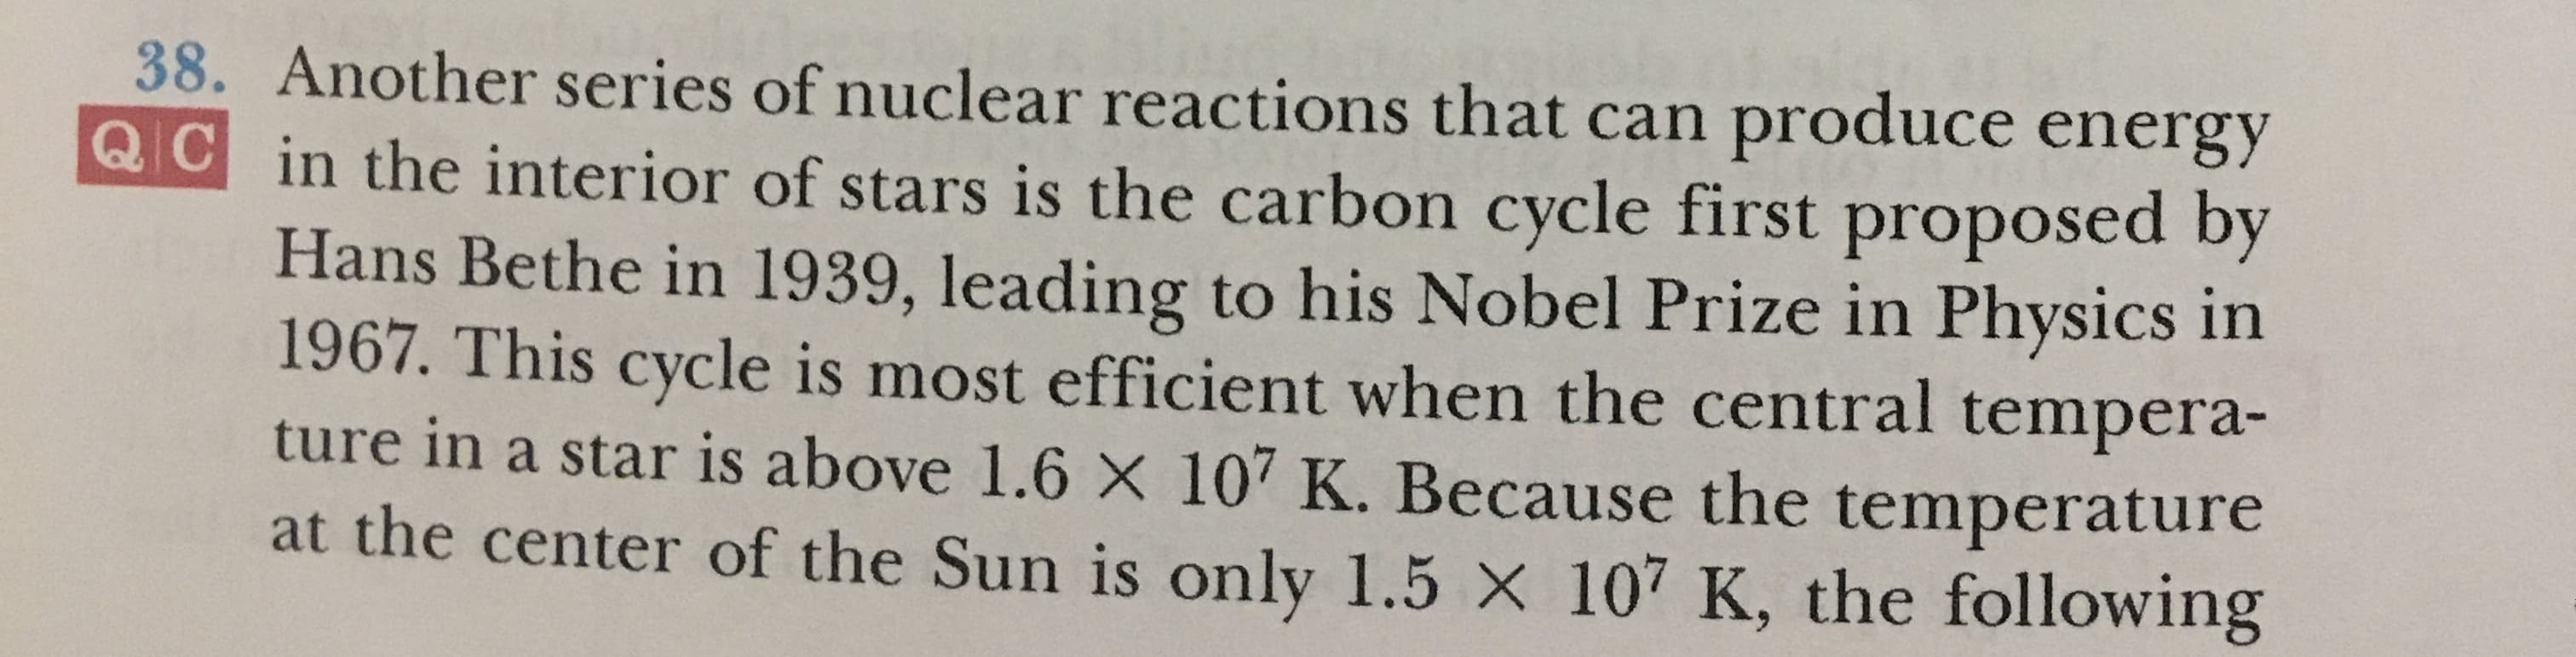 38. Another series of nuclear reactions that can produce energy
QC in the interior of stars is the carbon cycle first proposed by
Hans Bethe in 1939, leading to his Nobel Prize in Physics in
1967. This cycle is most efficient when the central tempera-
ture in a star is above 1.6 X 107 K. Because the temperature
at the center of the Sun is only 1.5 X 107 K, the following
